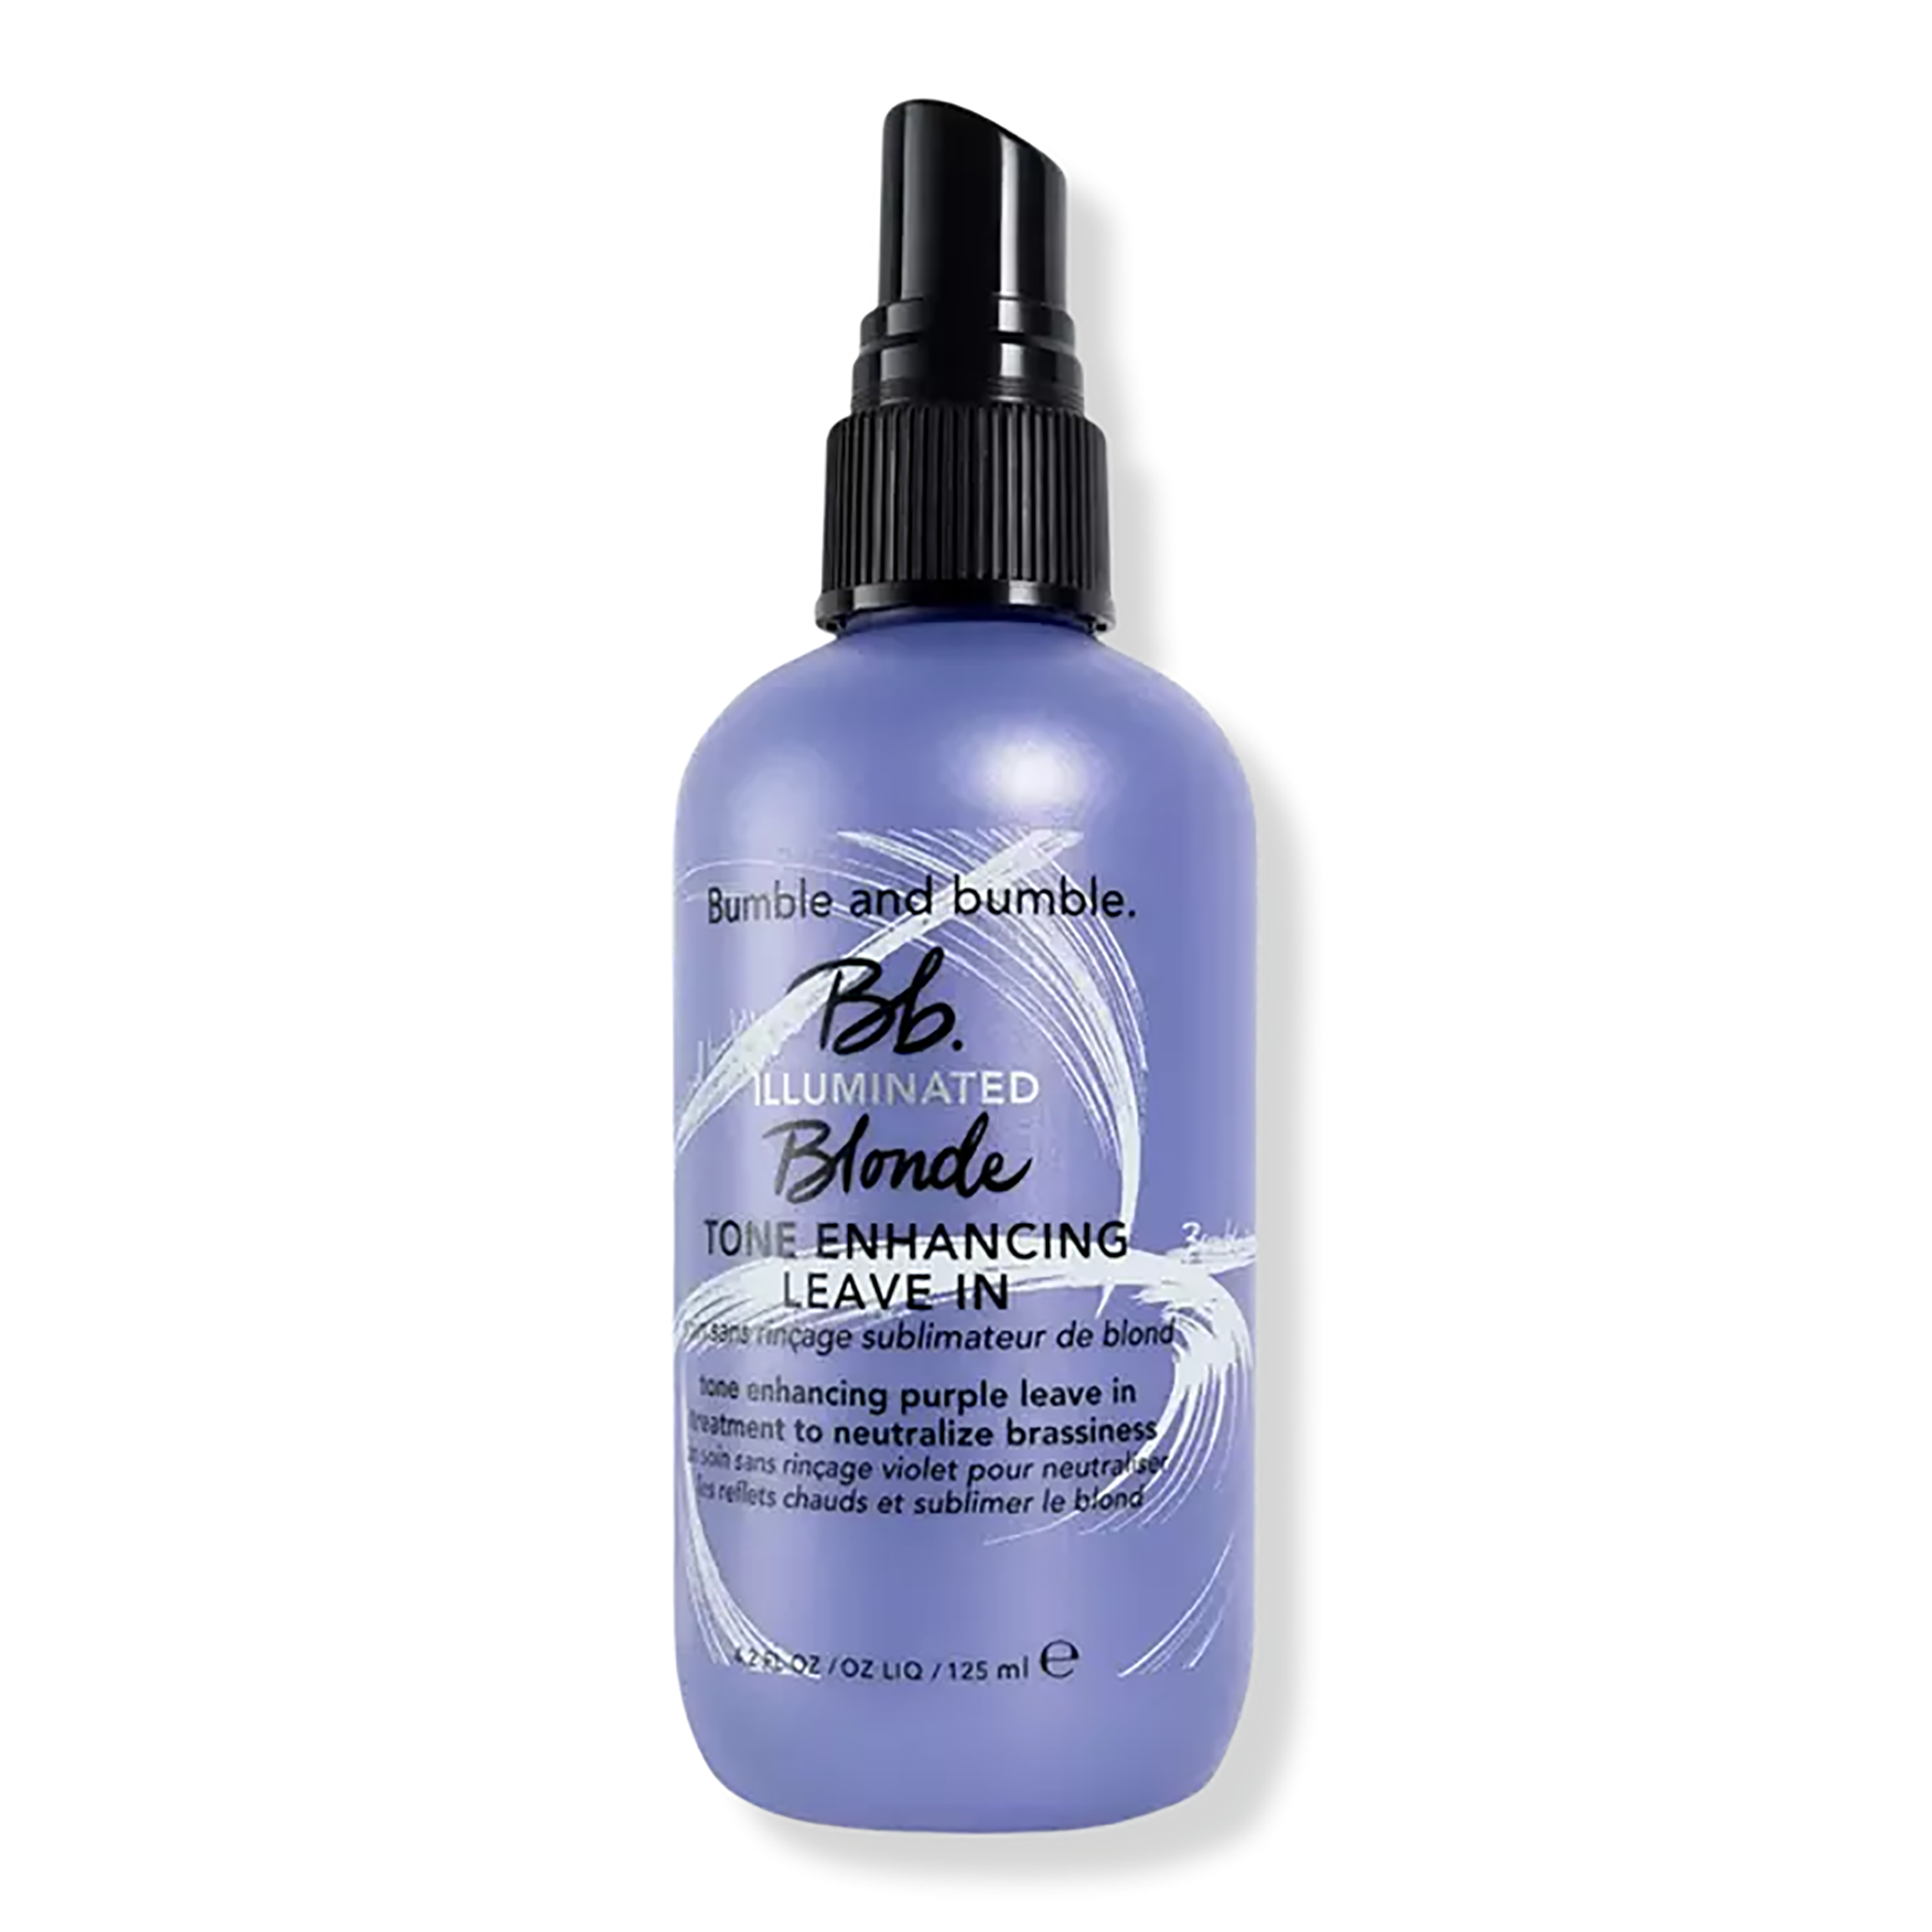 Bumble and bumble Illuminated Blonde Leave-in Treatment / 4.2OZ